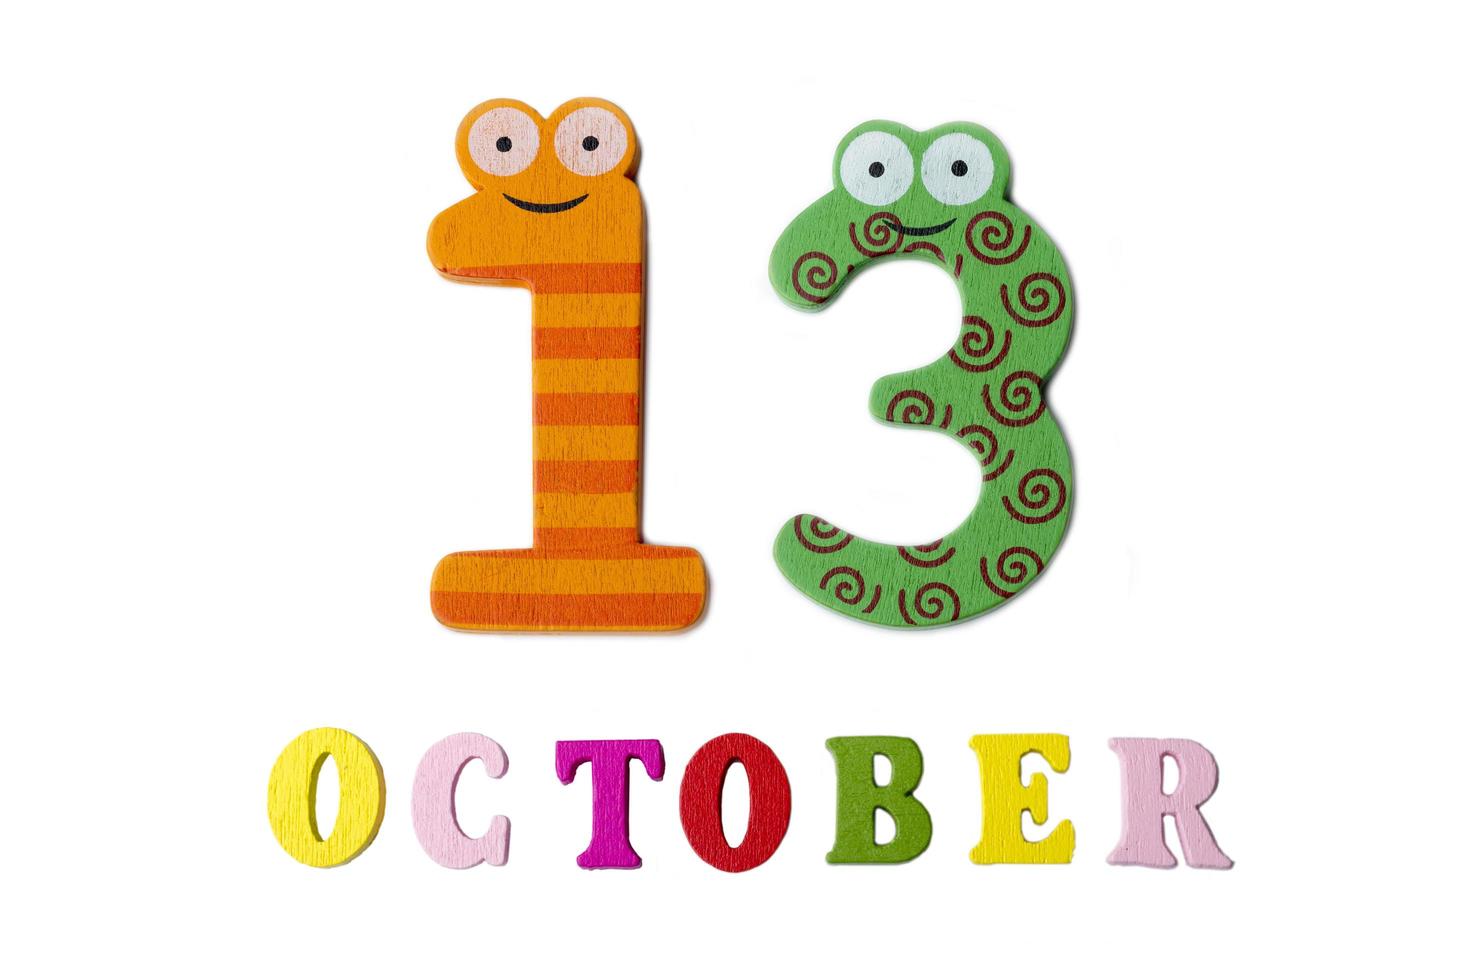 October 13 on white background, numbers and letters. photo